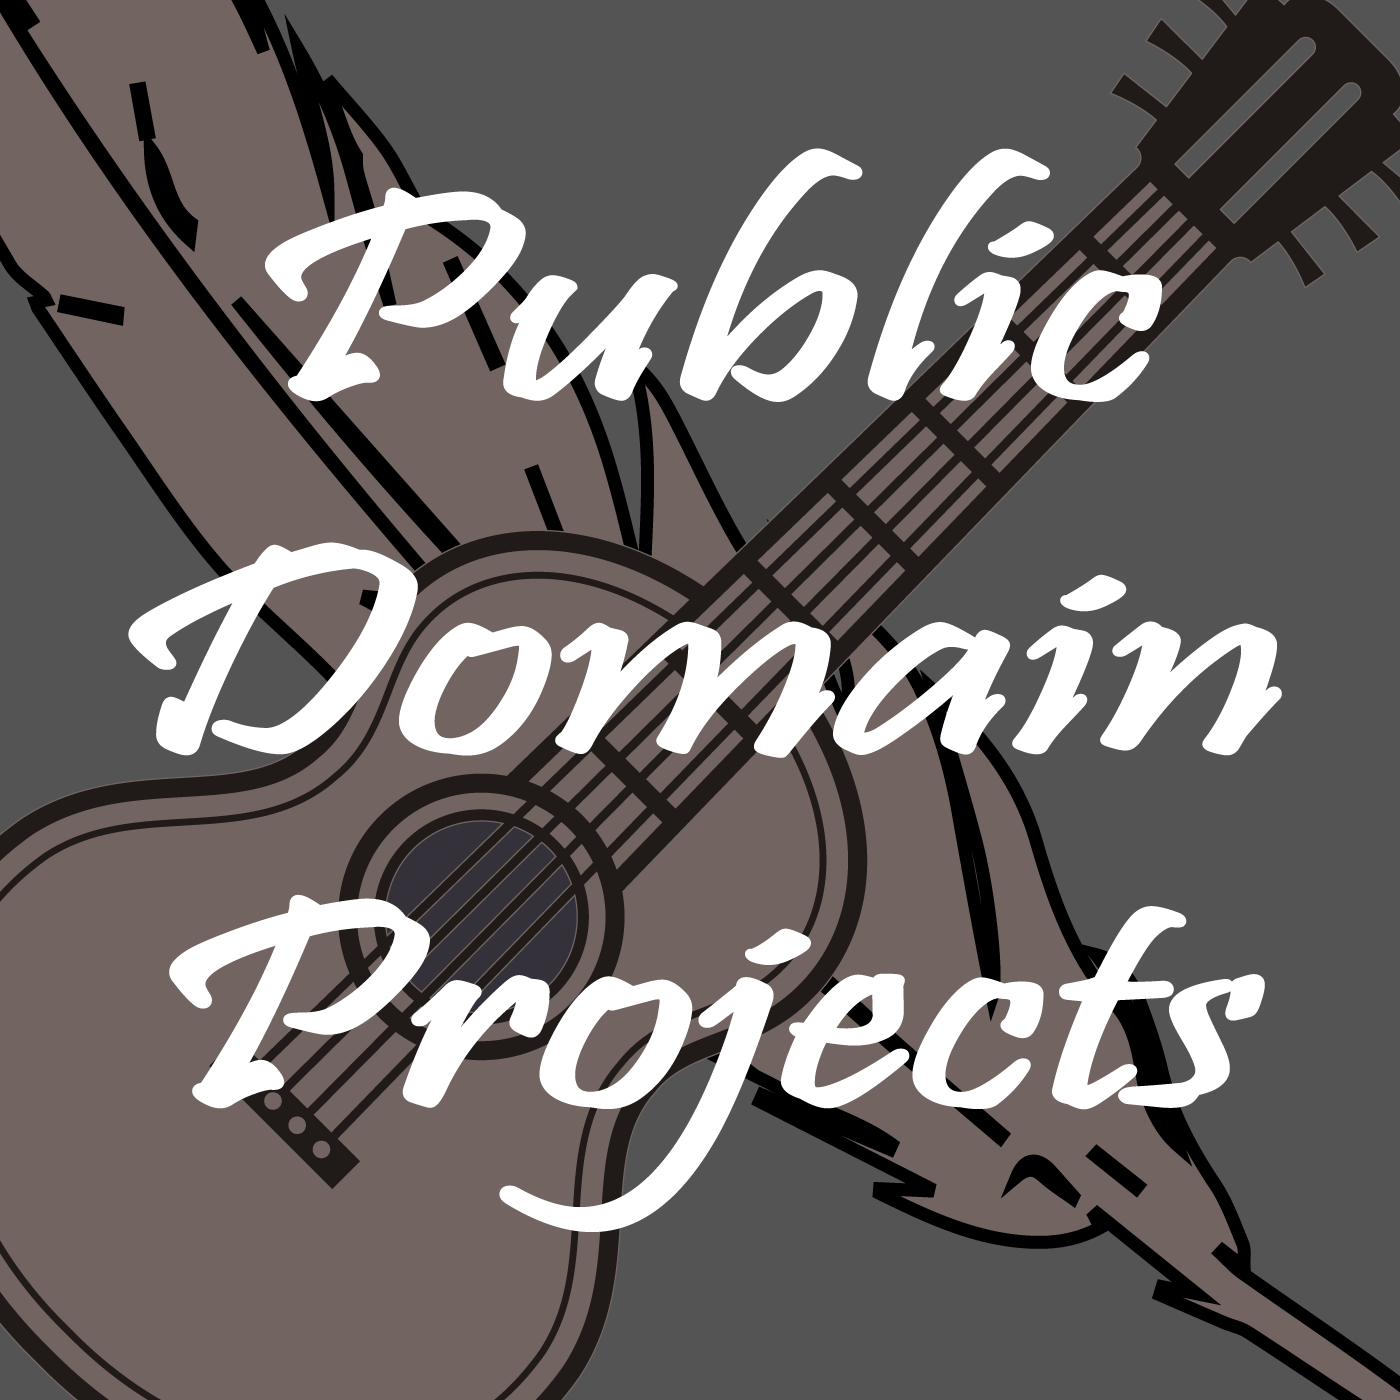 Public Domain Projects Podcast